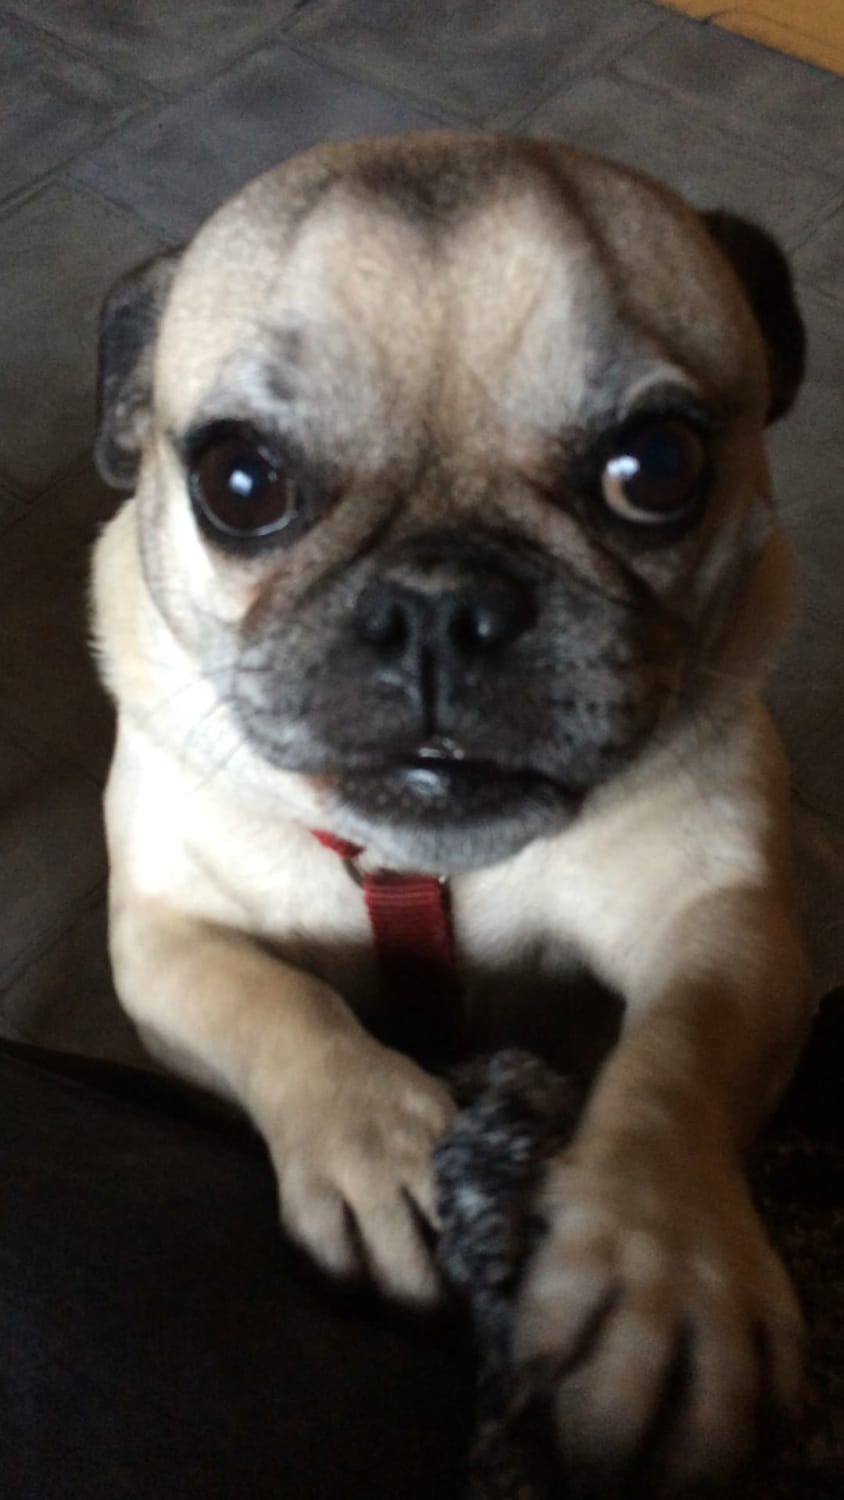 This is Paula the Pug. She wants cookies on my cake day.